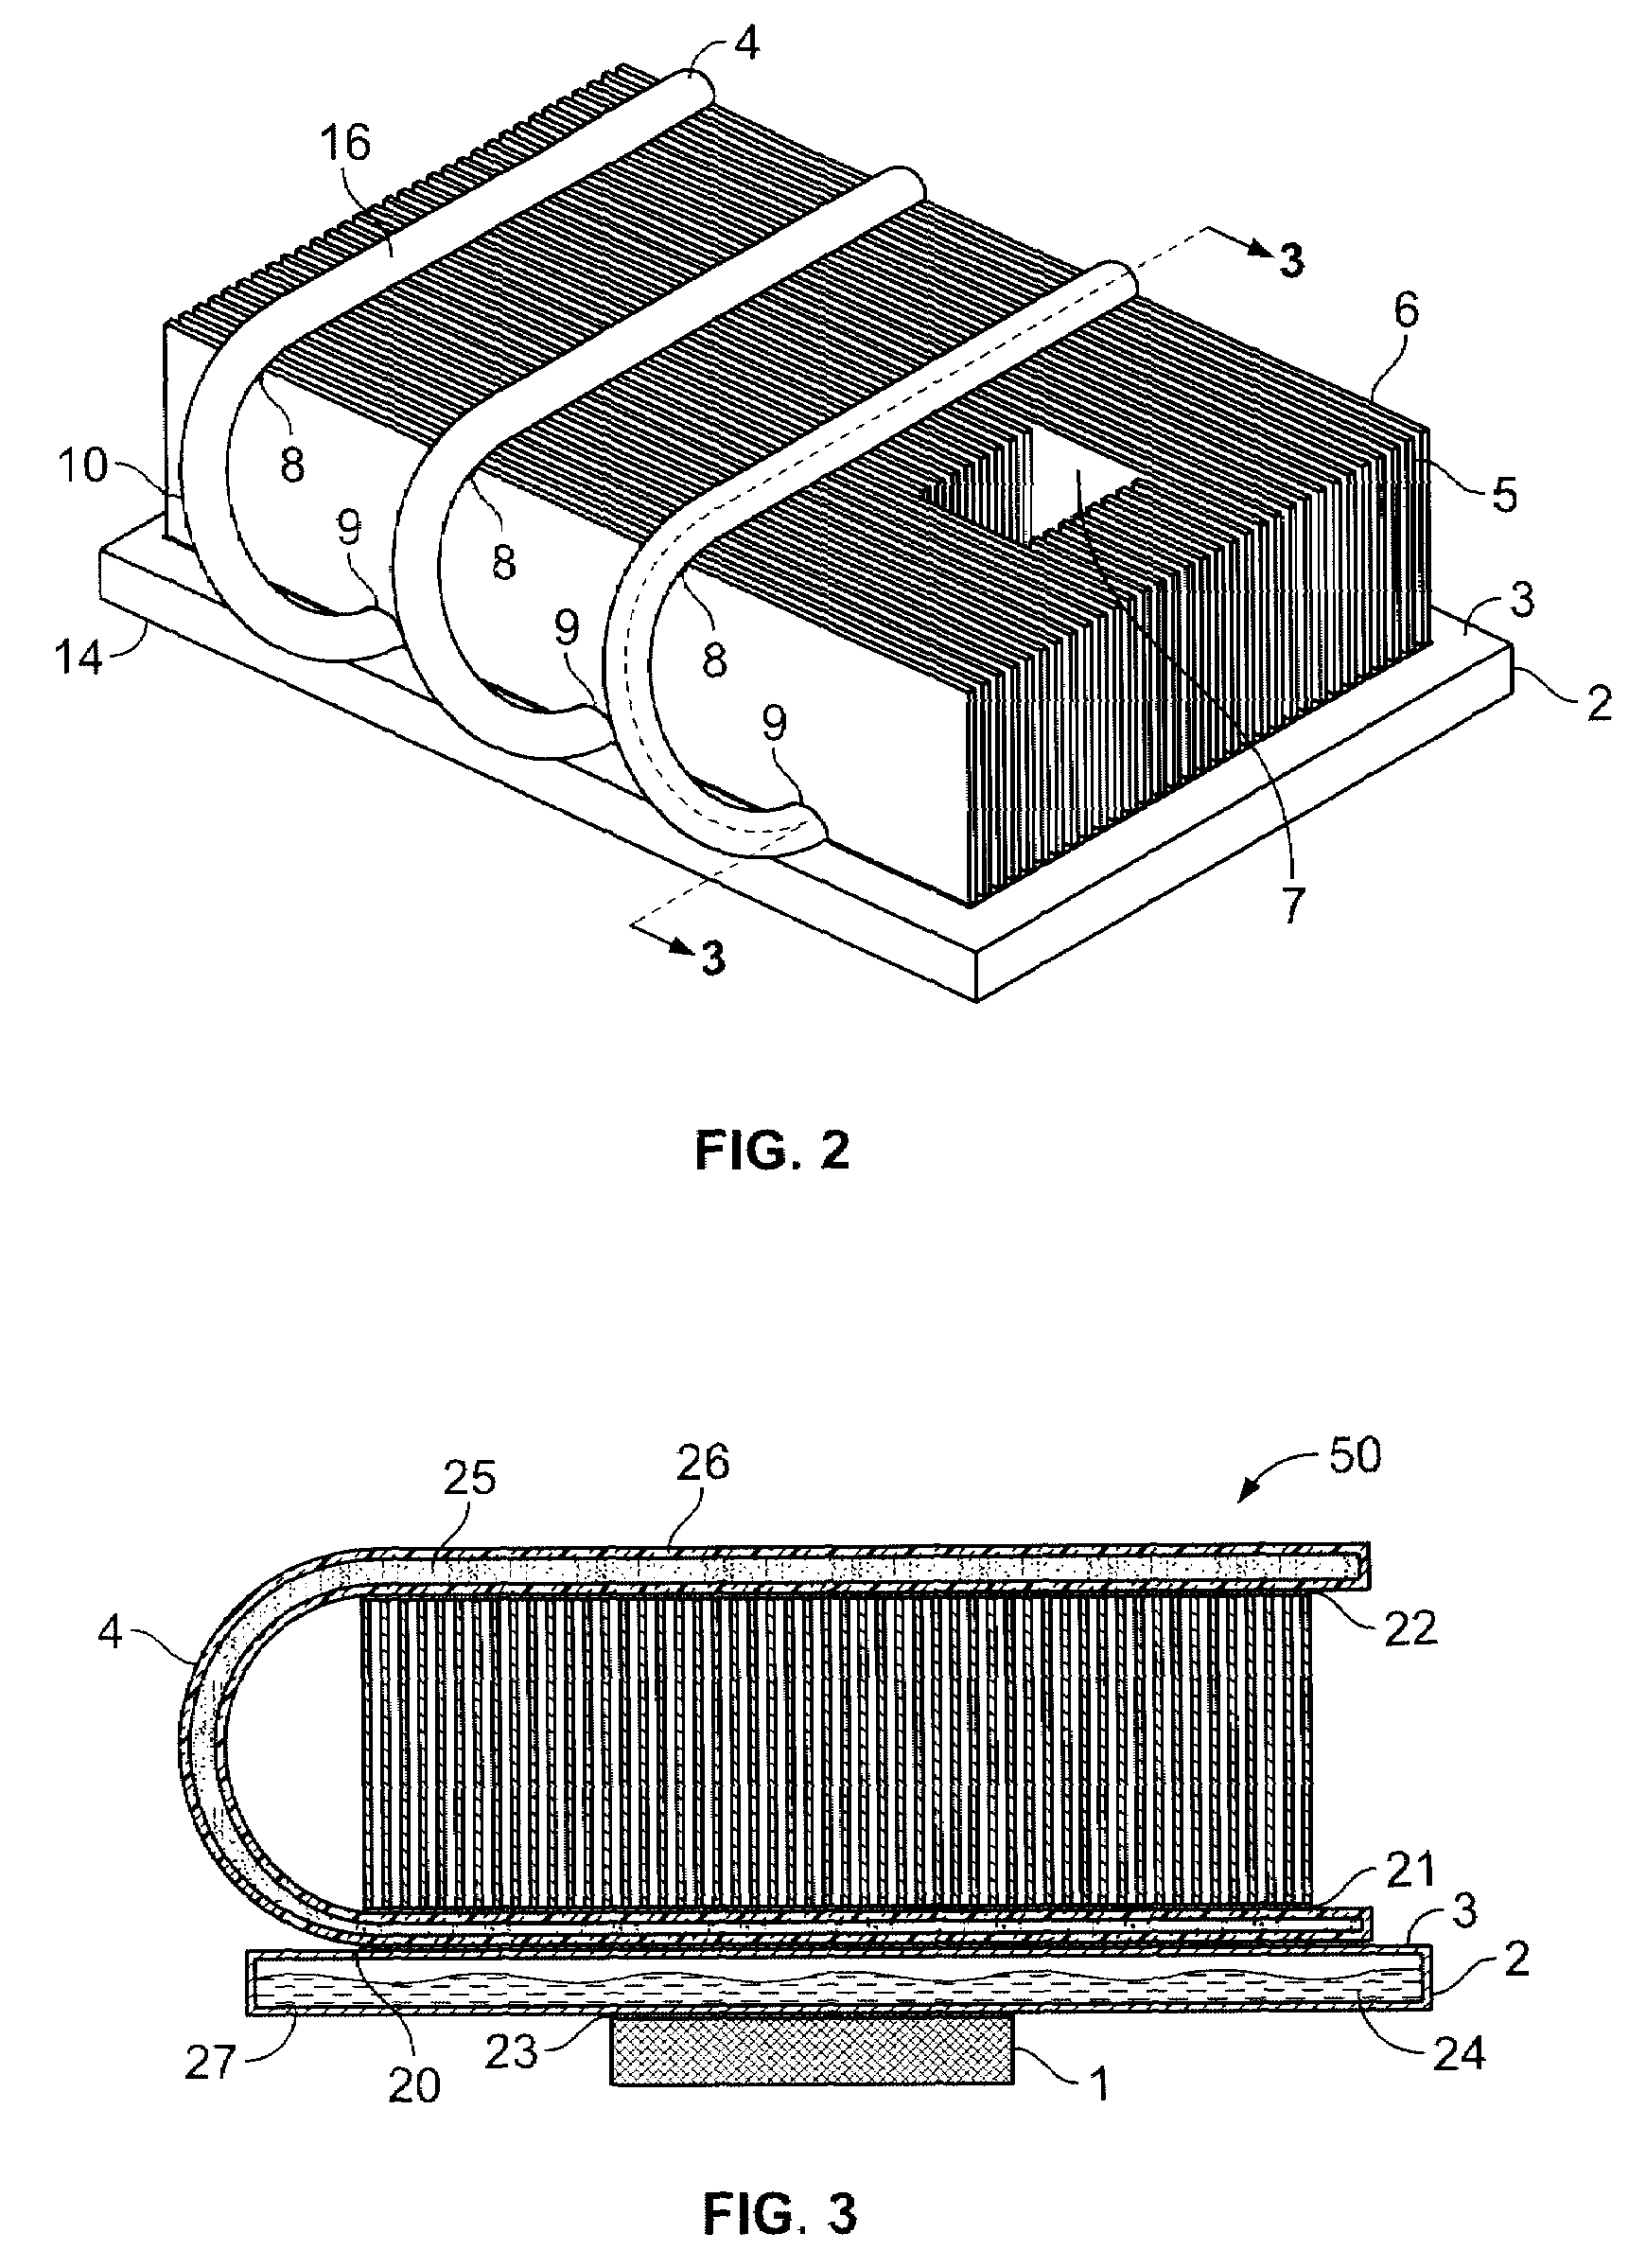 Three-Dimensional Thermal Spreading in an Air-Cooled Thermal Device